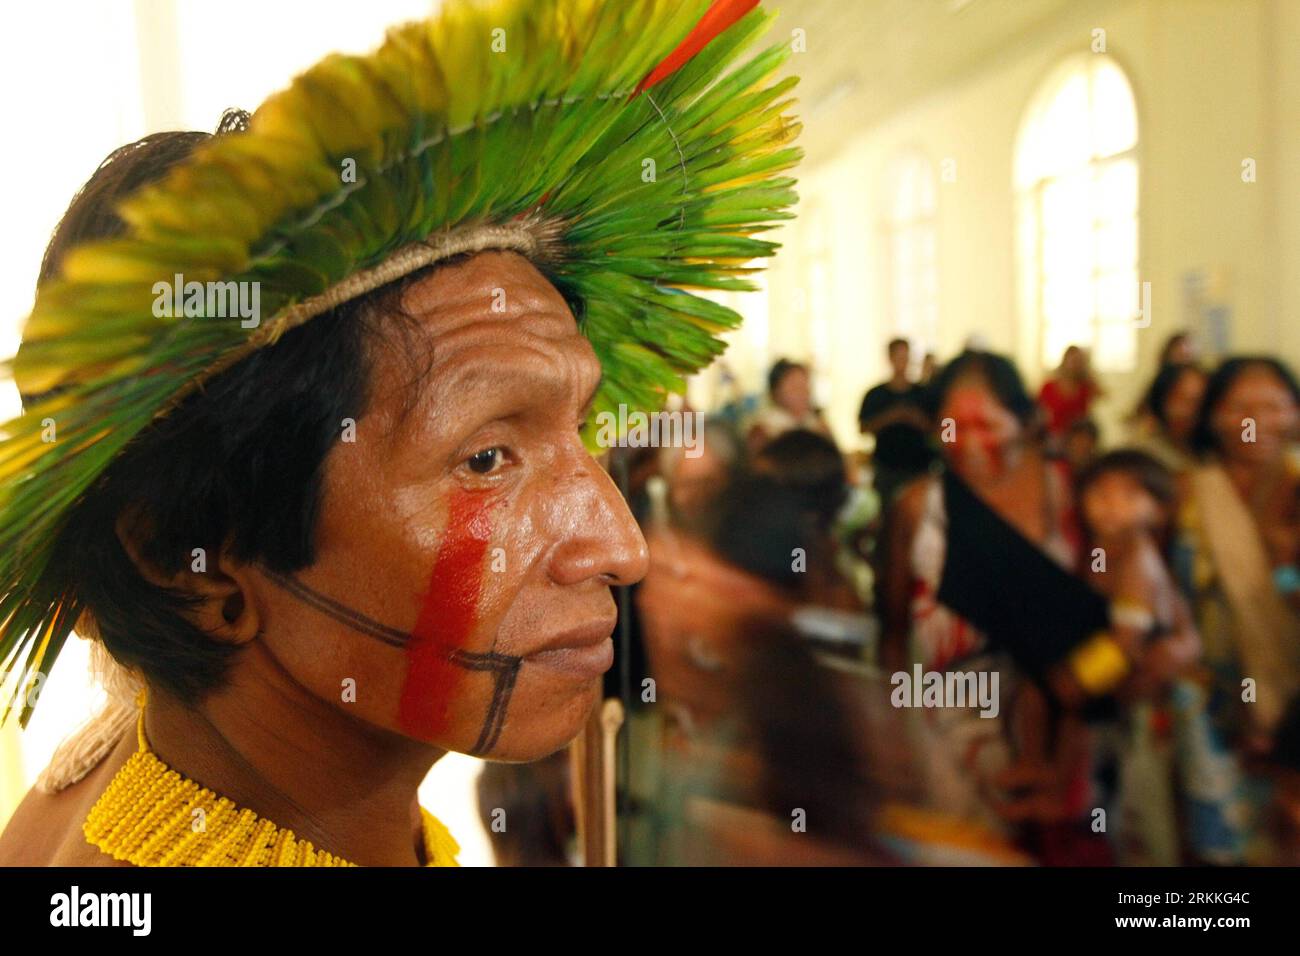 Bildnummer: 56239127  Datum: 01.11.2011  Copyright: imago/Xinhua (111102) -- BELEN, Nov. 2, 2011 (Xinhua) -- Members of the Kayapo ethnic group from the Sao Felix do Xingu municipality participate in a rally to demand public transportation services in front of the Justice and Human Rights Secretary in Belen, capital of Para state, Brazil, Nov. 1, 2011. (Xinhua/Tarso Sarraf)(ctt) BRASIL-BELEN-SOCIETY-PROTEST PUBLICATIONxNOTxINxCHN Gesellschaft Indianer x0x xsk 2011 quer premiumd      56239127 Date 01 11 2011 Copyright Imago XINHUA  Belen Nov 2 2011 XINHUA Members of The Kayapo Ethnic Group from Stock Photo